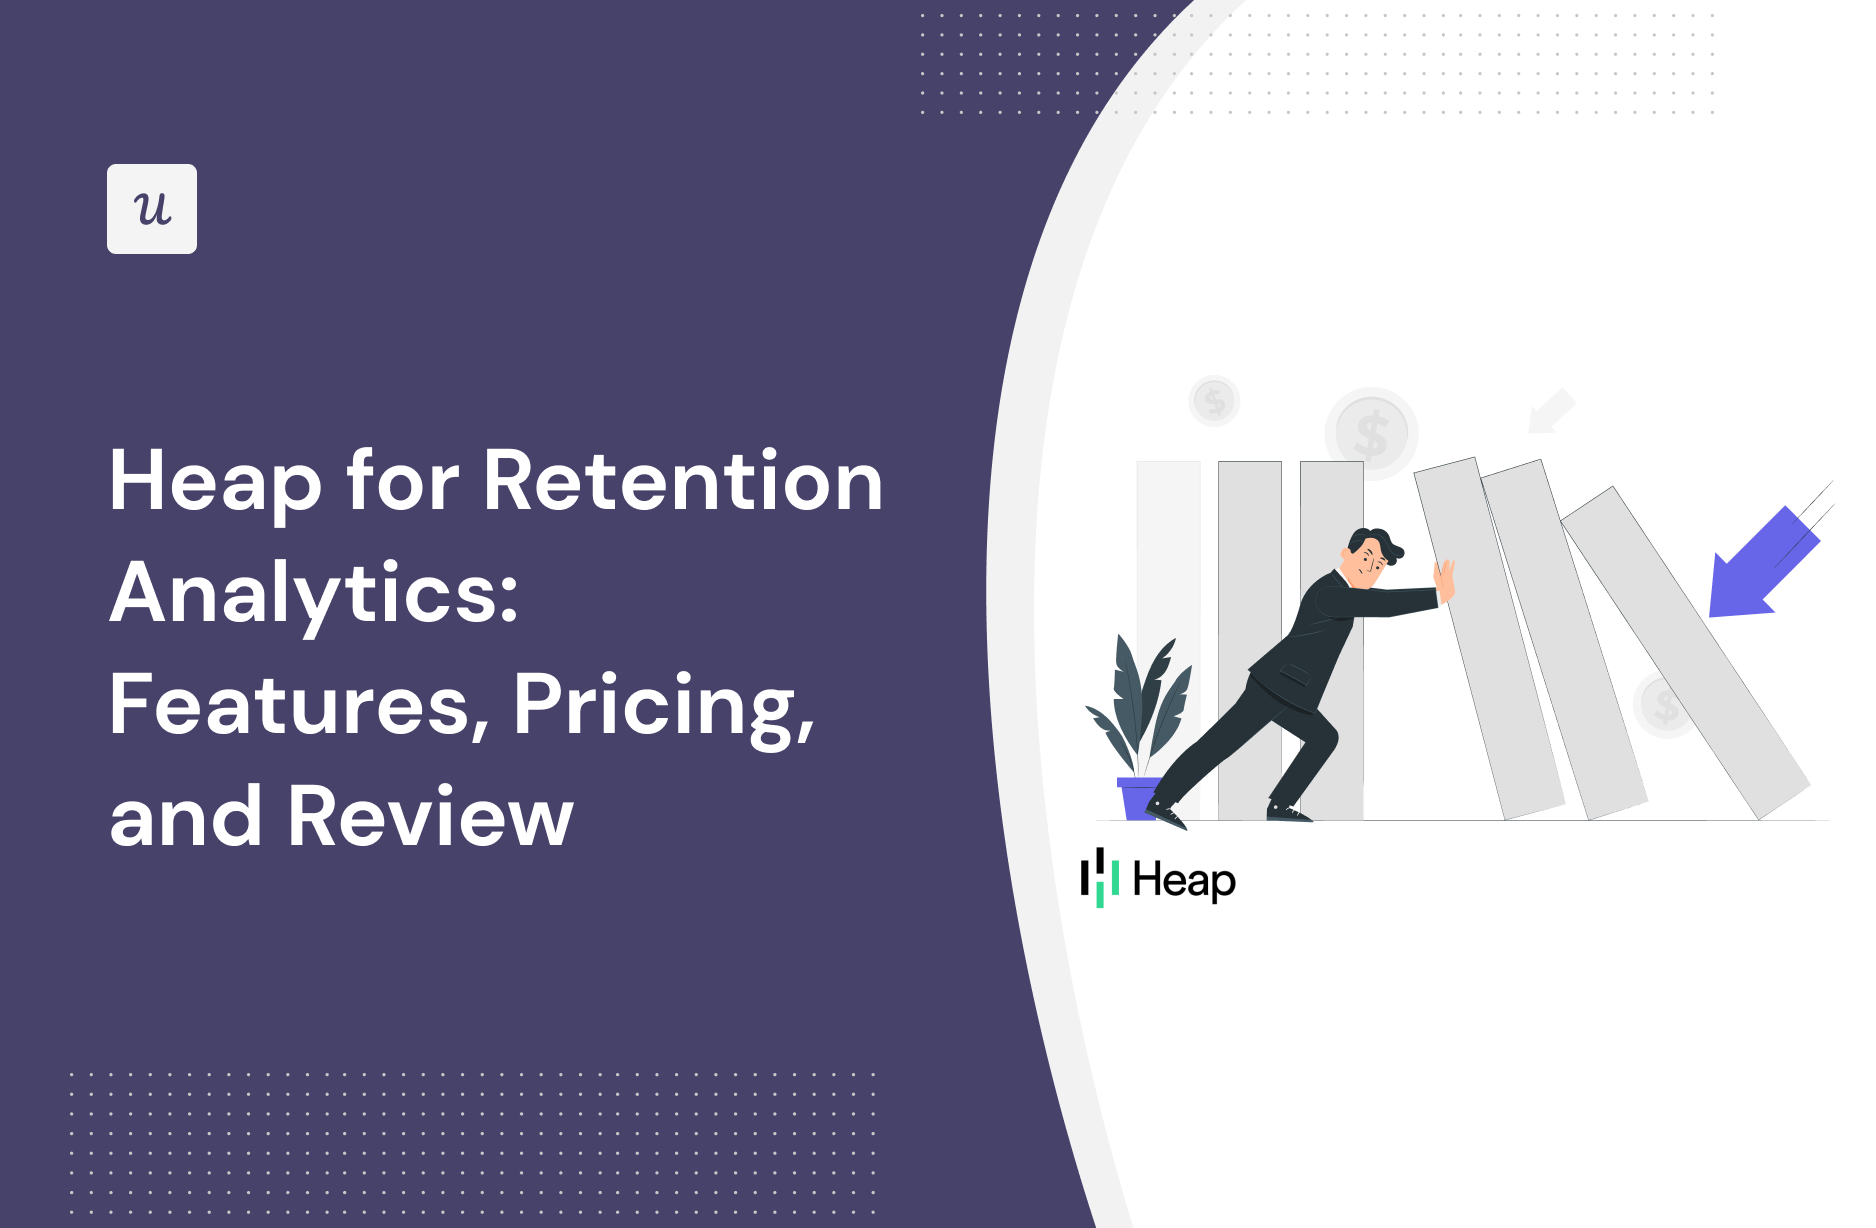 Heap for Retention Analytics: Features, Pricing, and Review